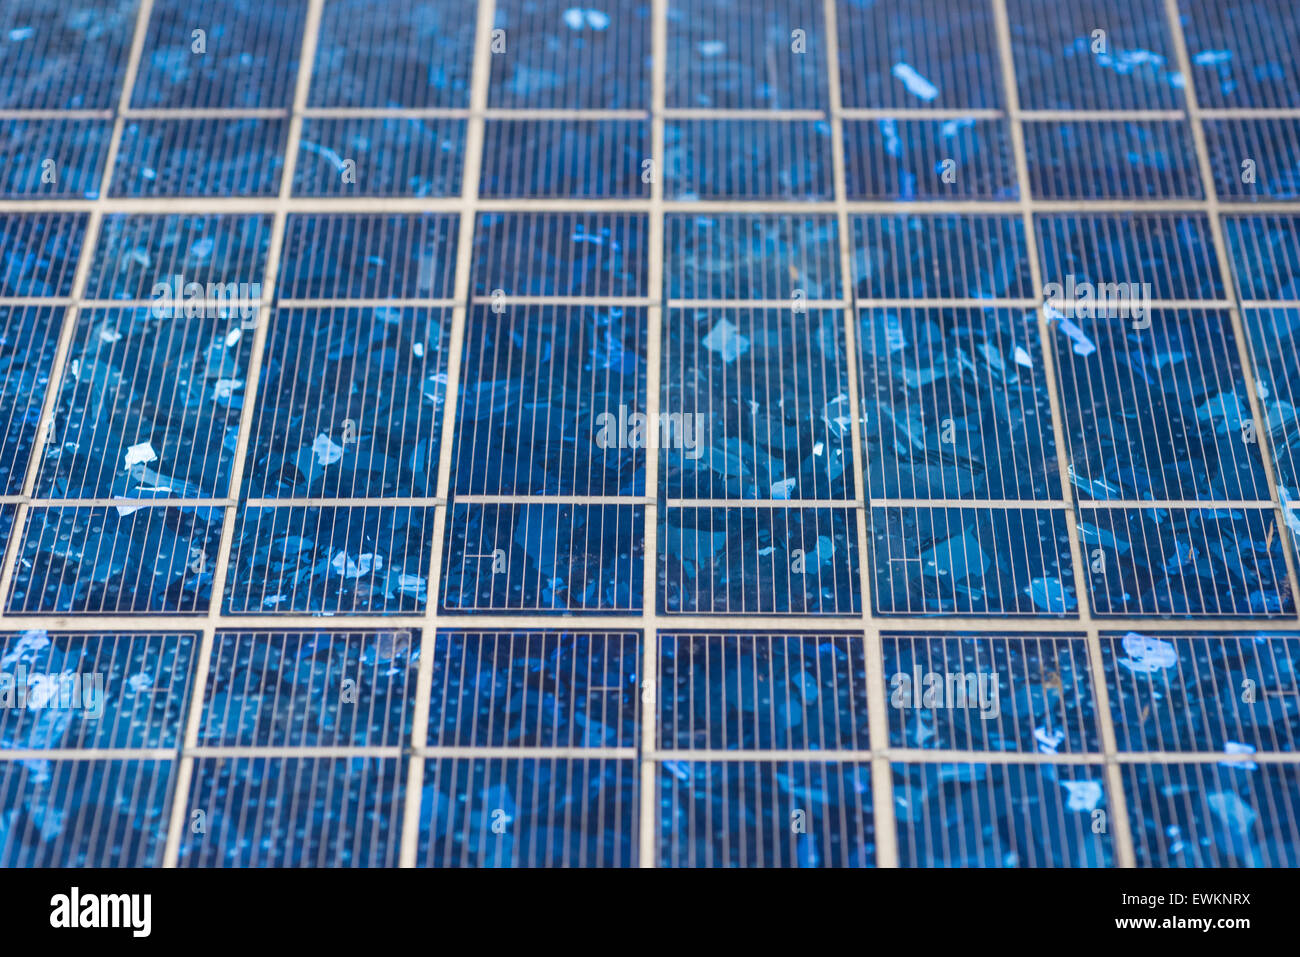 Abstract image of blue solar panels detail, to produce electricity from the sun Stock Photo